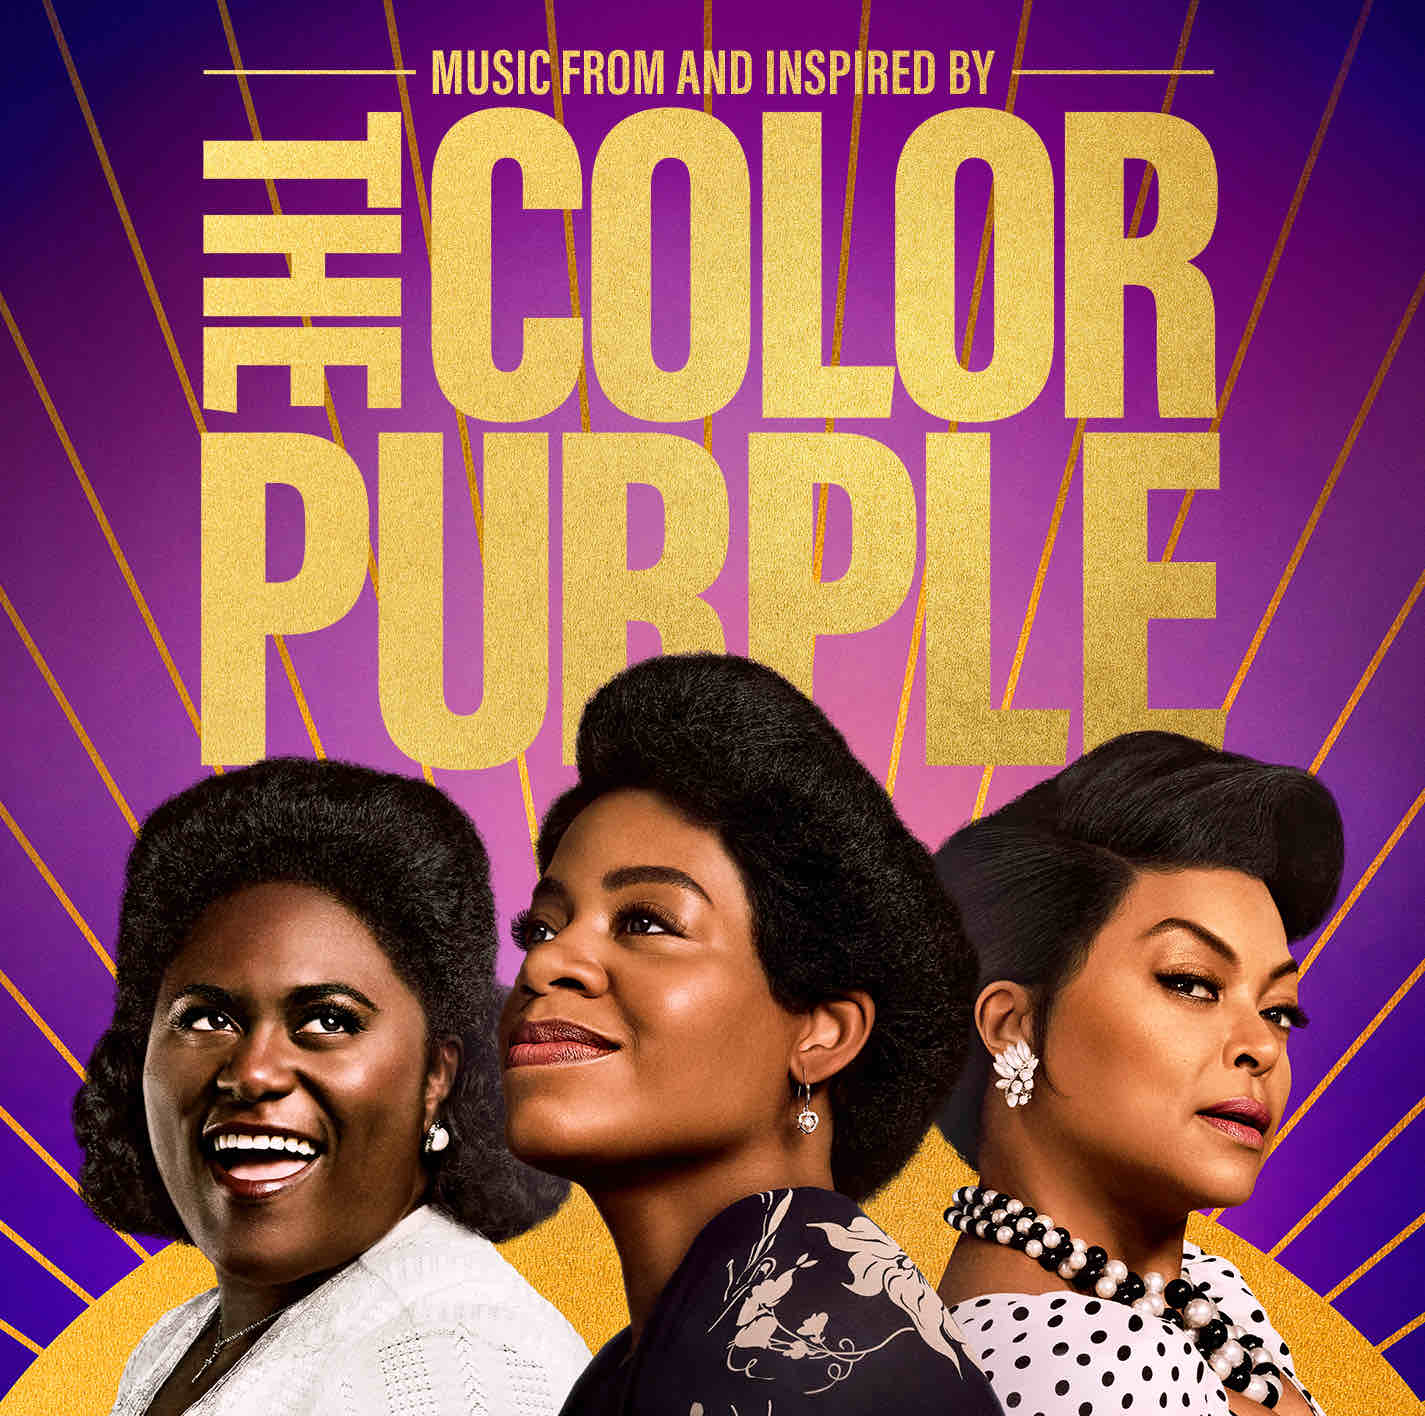 VARIOUS ARTISTS - The Colour Purple (Music From And Inspired By) - 3LP - Purple Vinyl